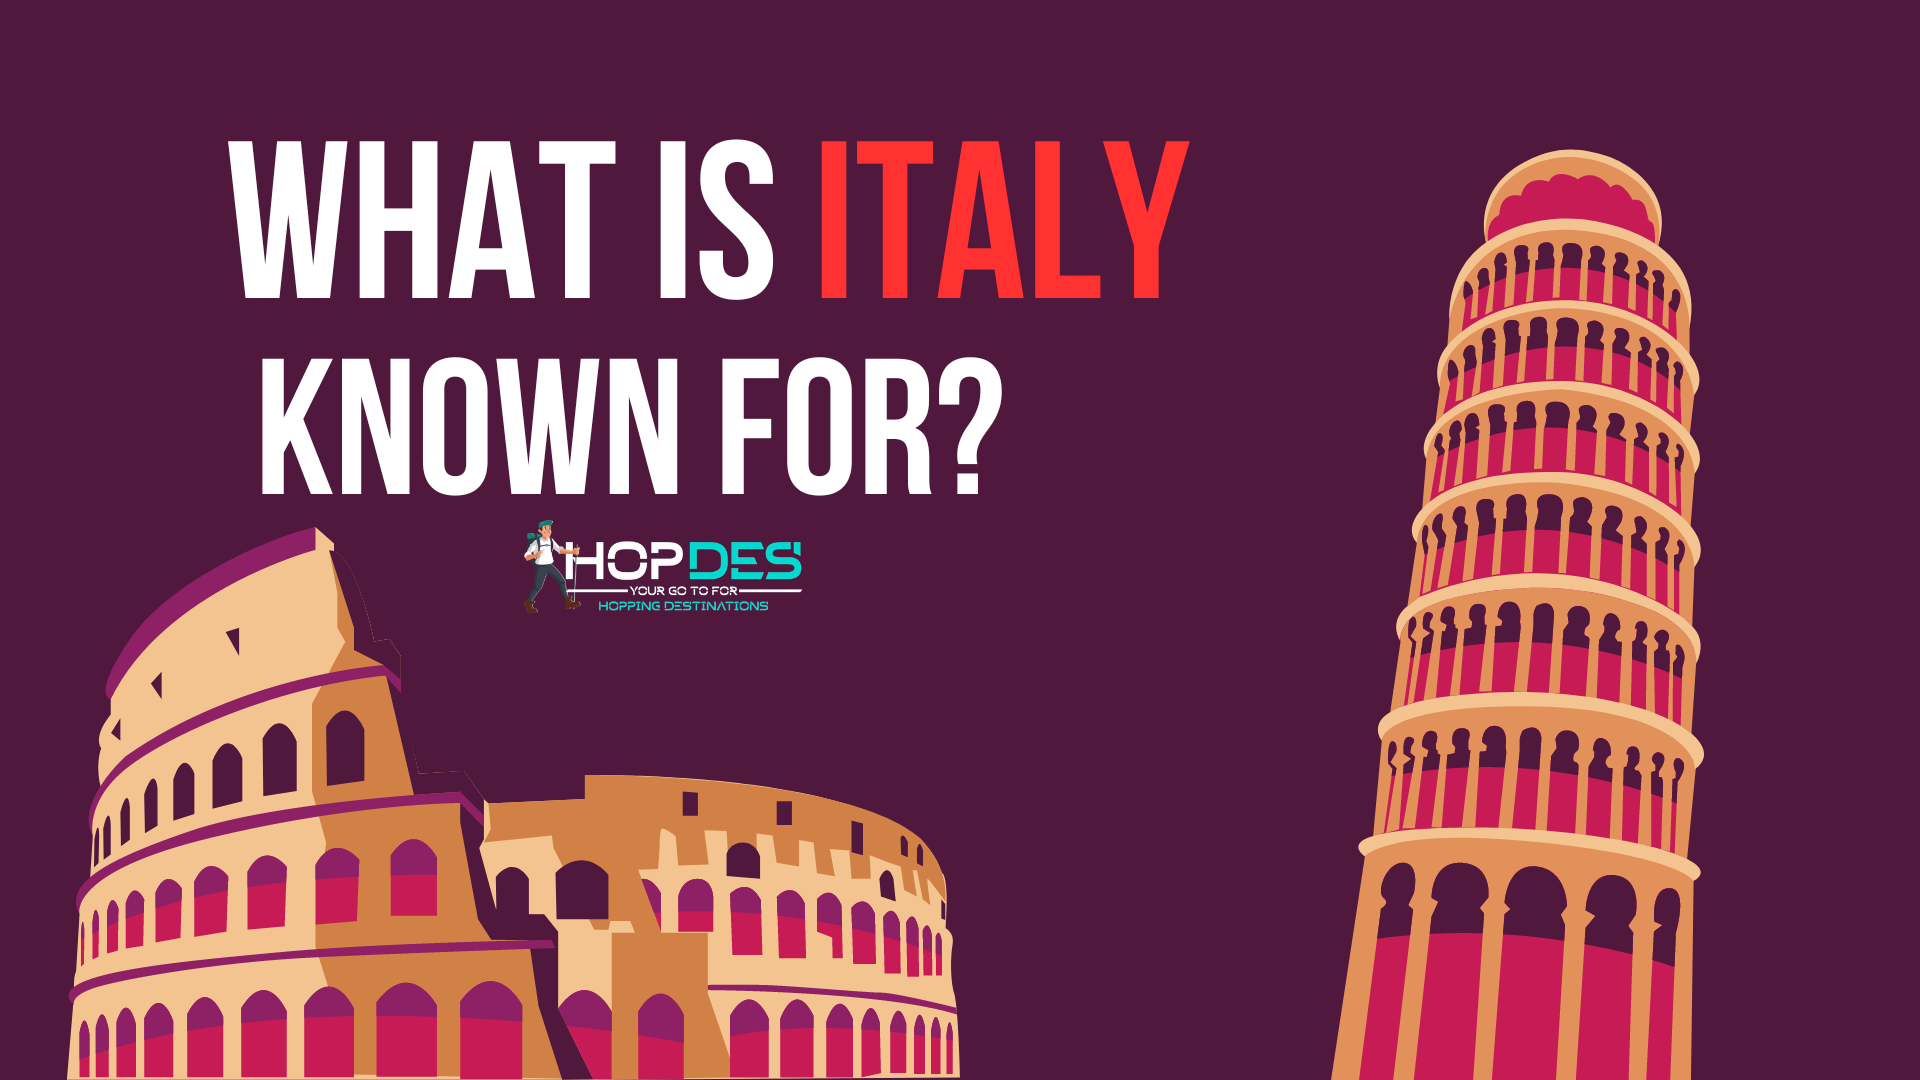 What is Italy Known For?